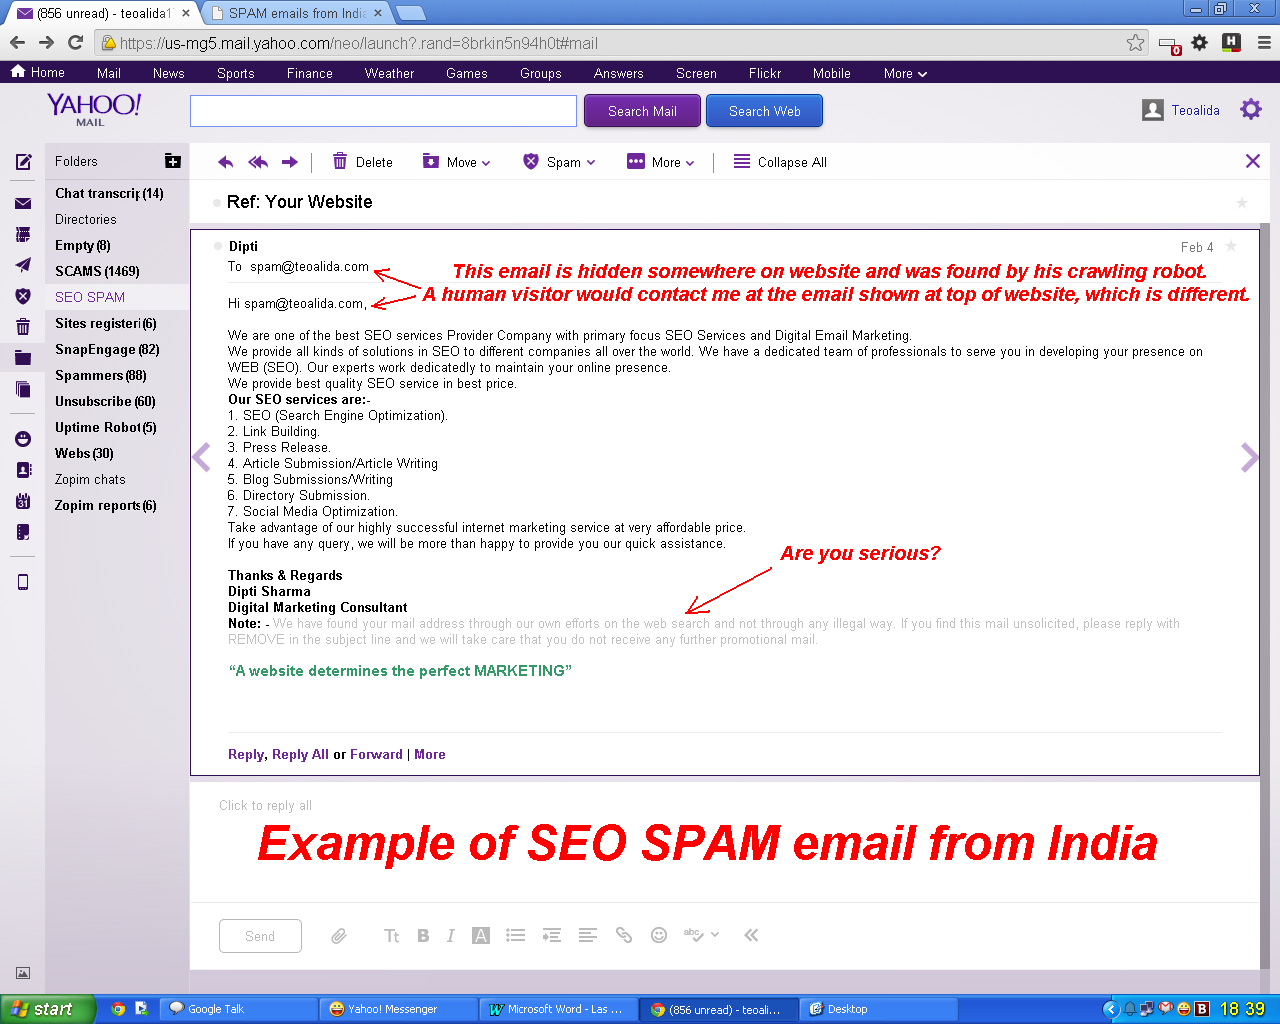 SEO SPAM from India